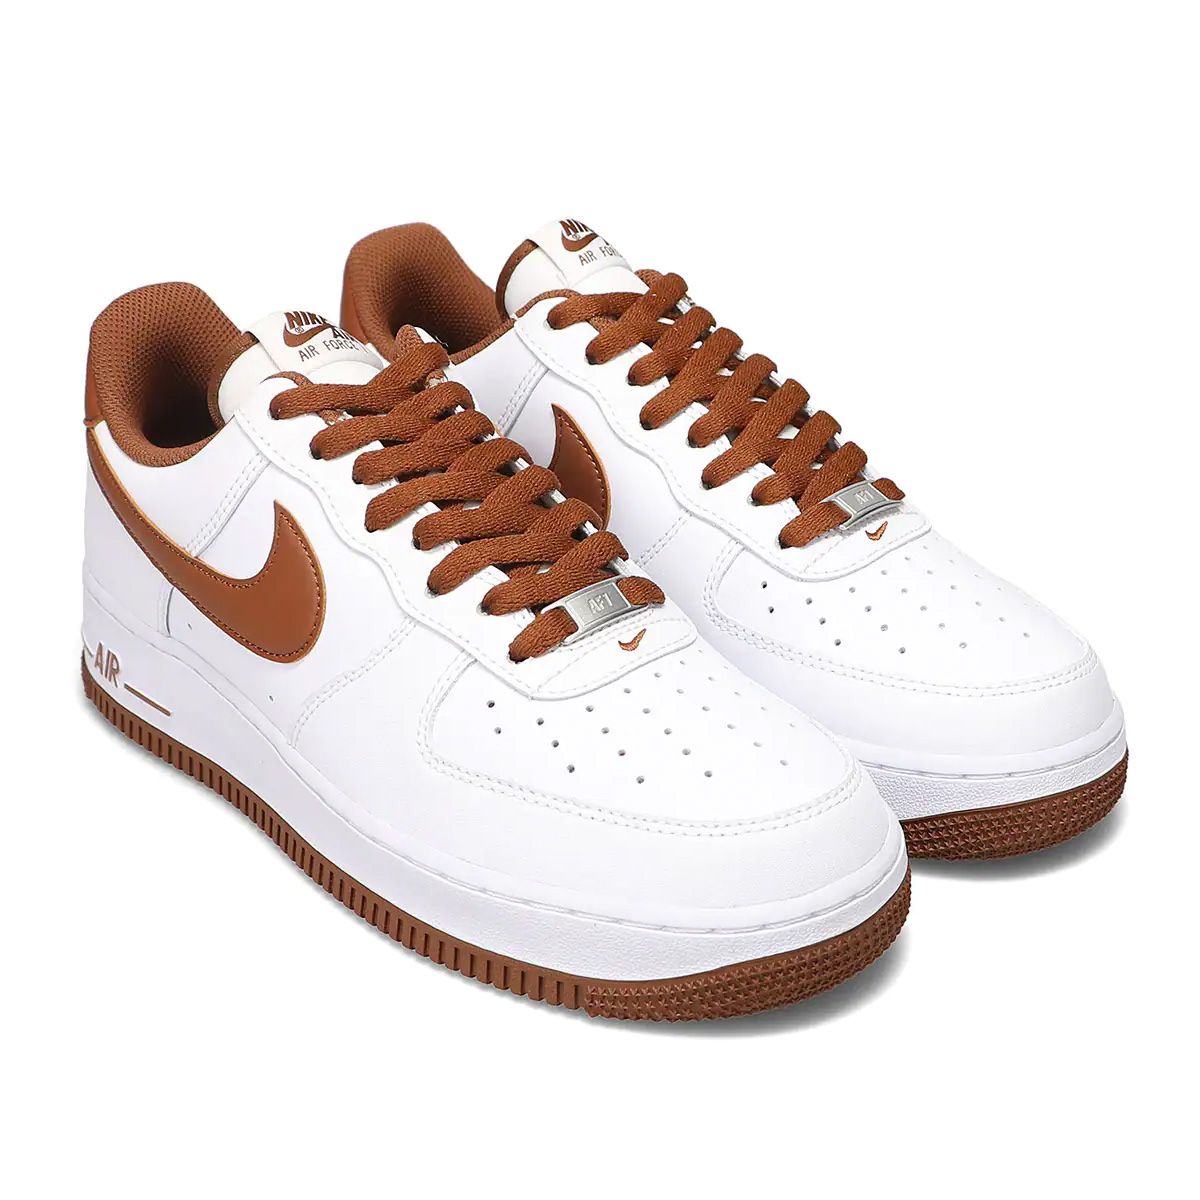 New Looks ⁄⁄ Nike Air Force 1 Low "Pecan" | HOUSE OF HEAT